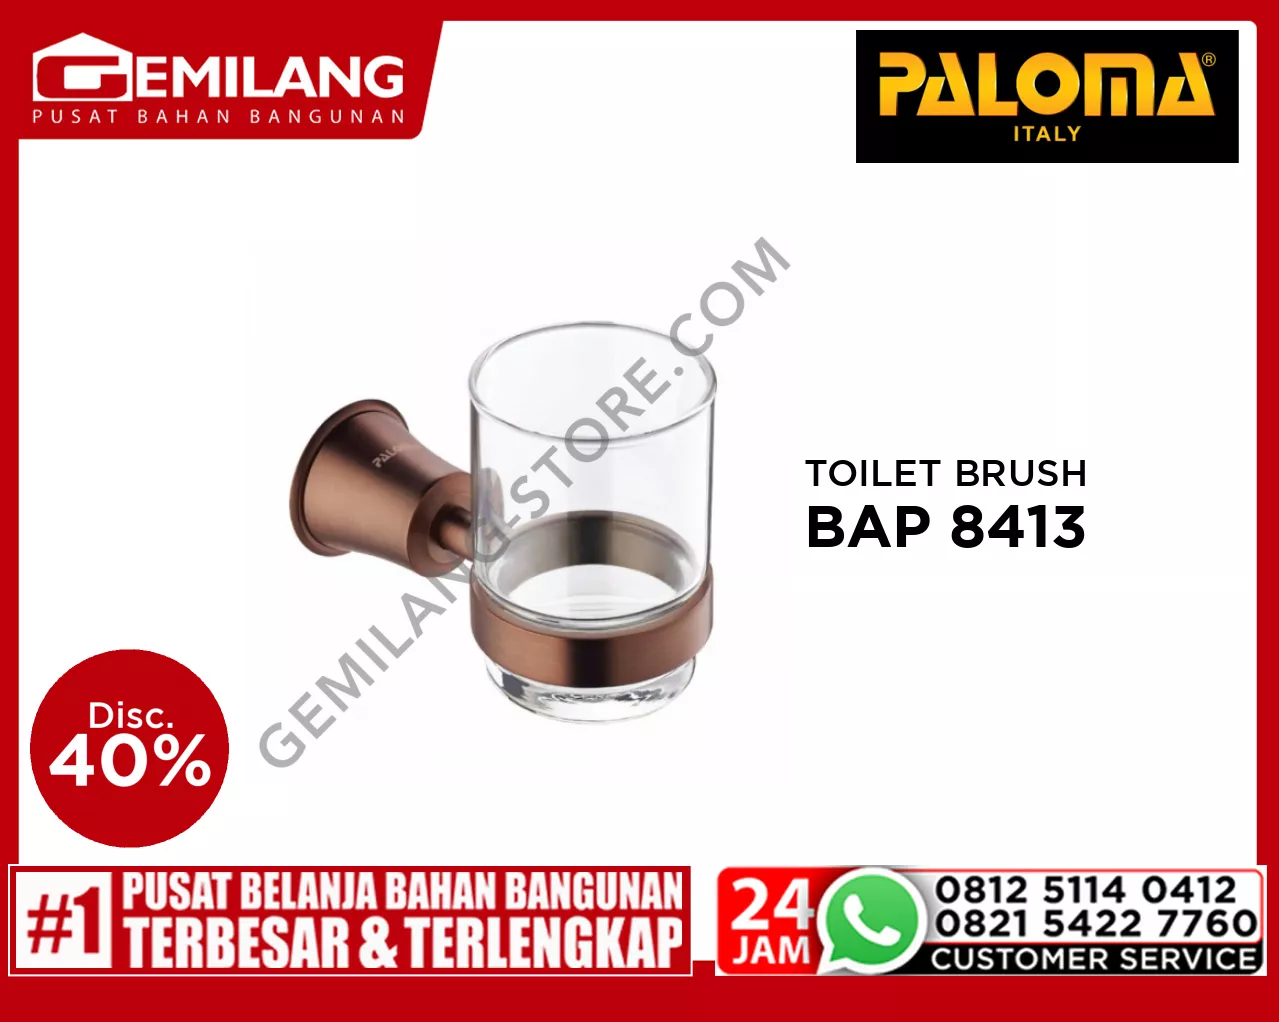 PALOMA LIBERTY BRASS TUMBLER HOLDER WITH GLASS ORB BAP 8410